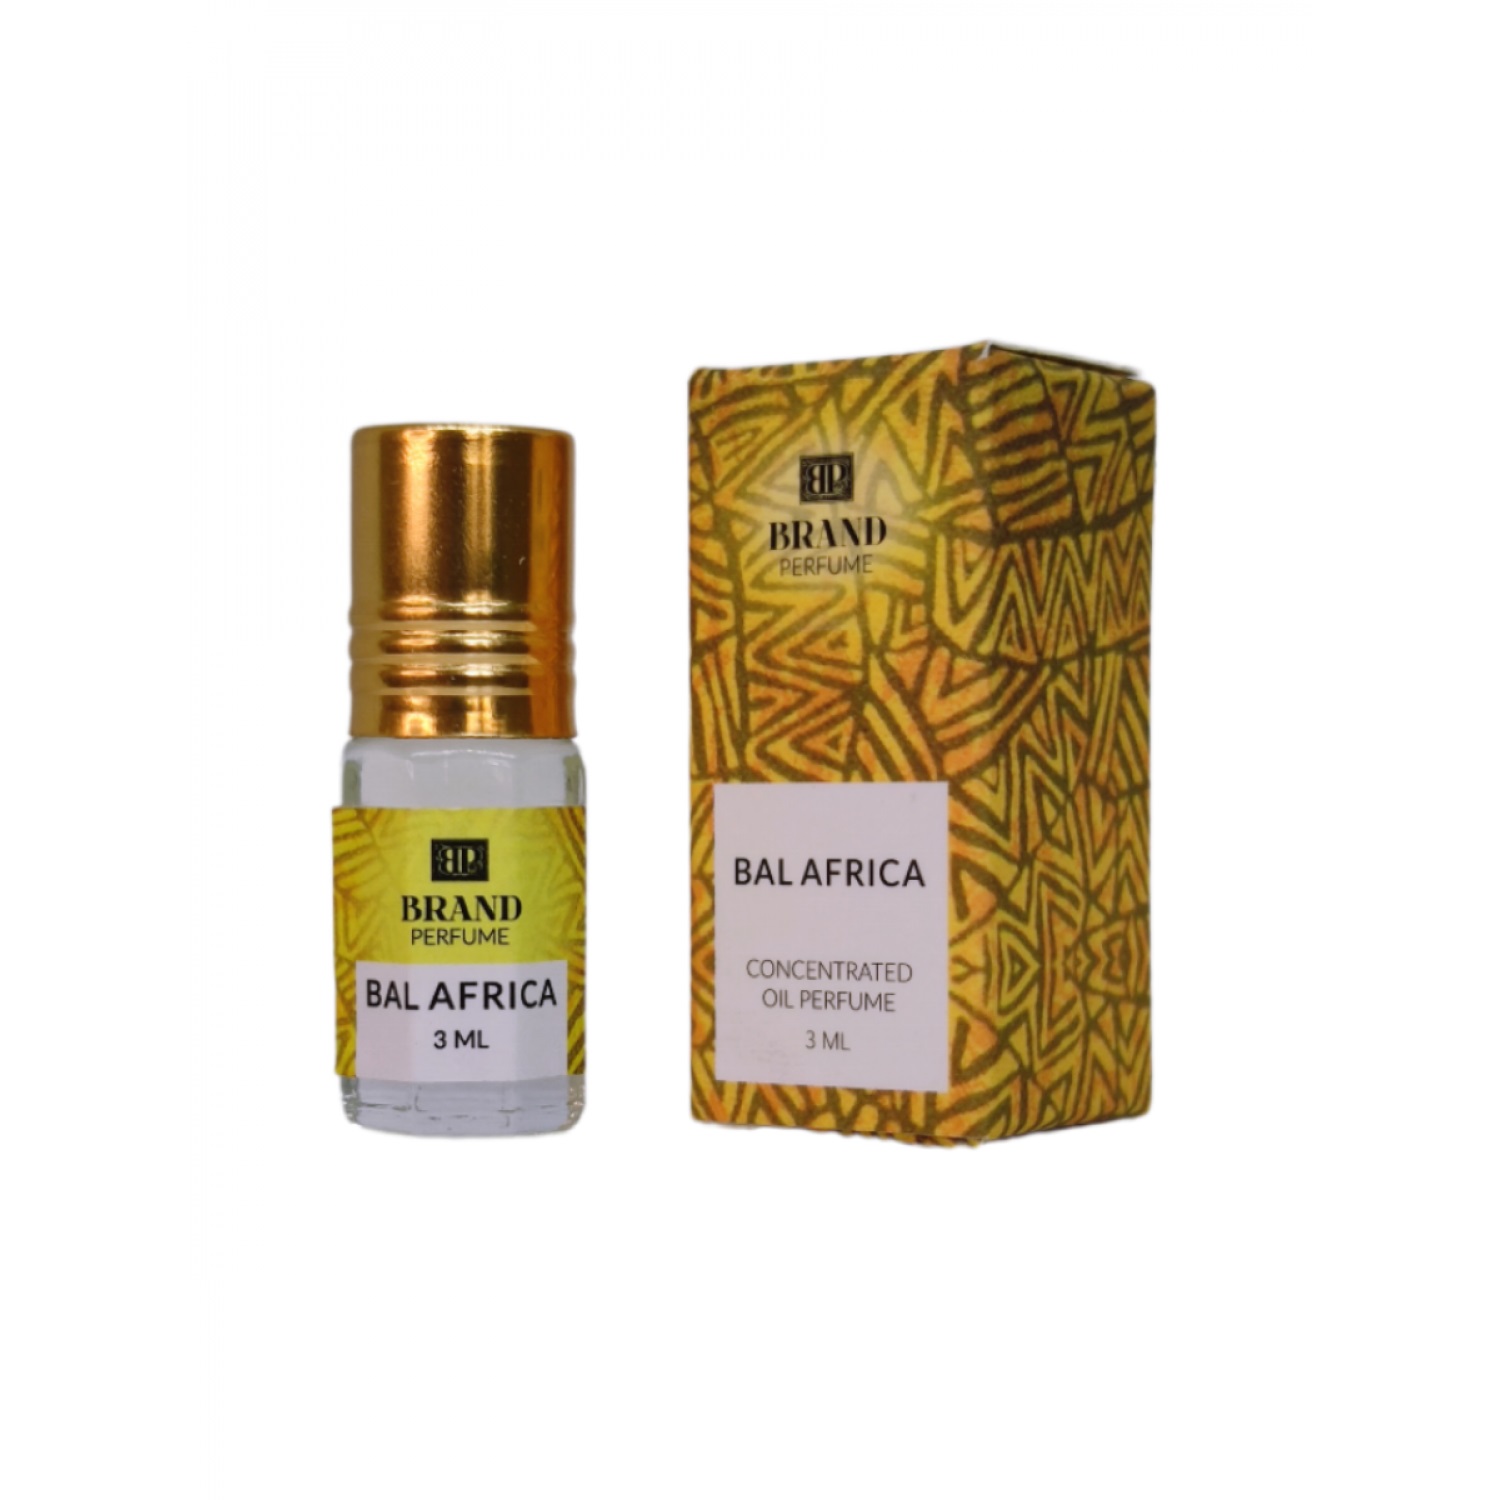 BAL AFRICA Concentrated Oil Perfume, Brand Perfume (Концентрированные масляные духи), ролик, 3 мл.